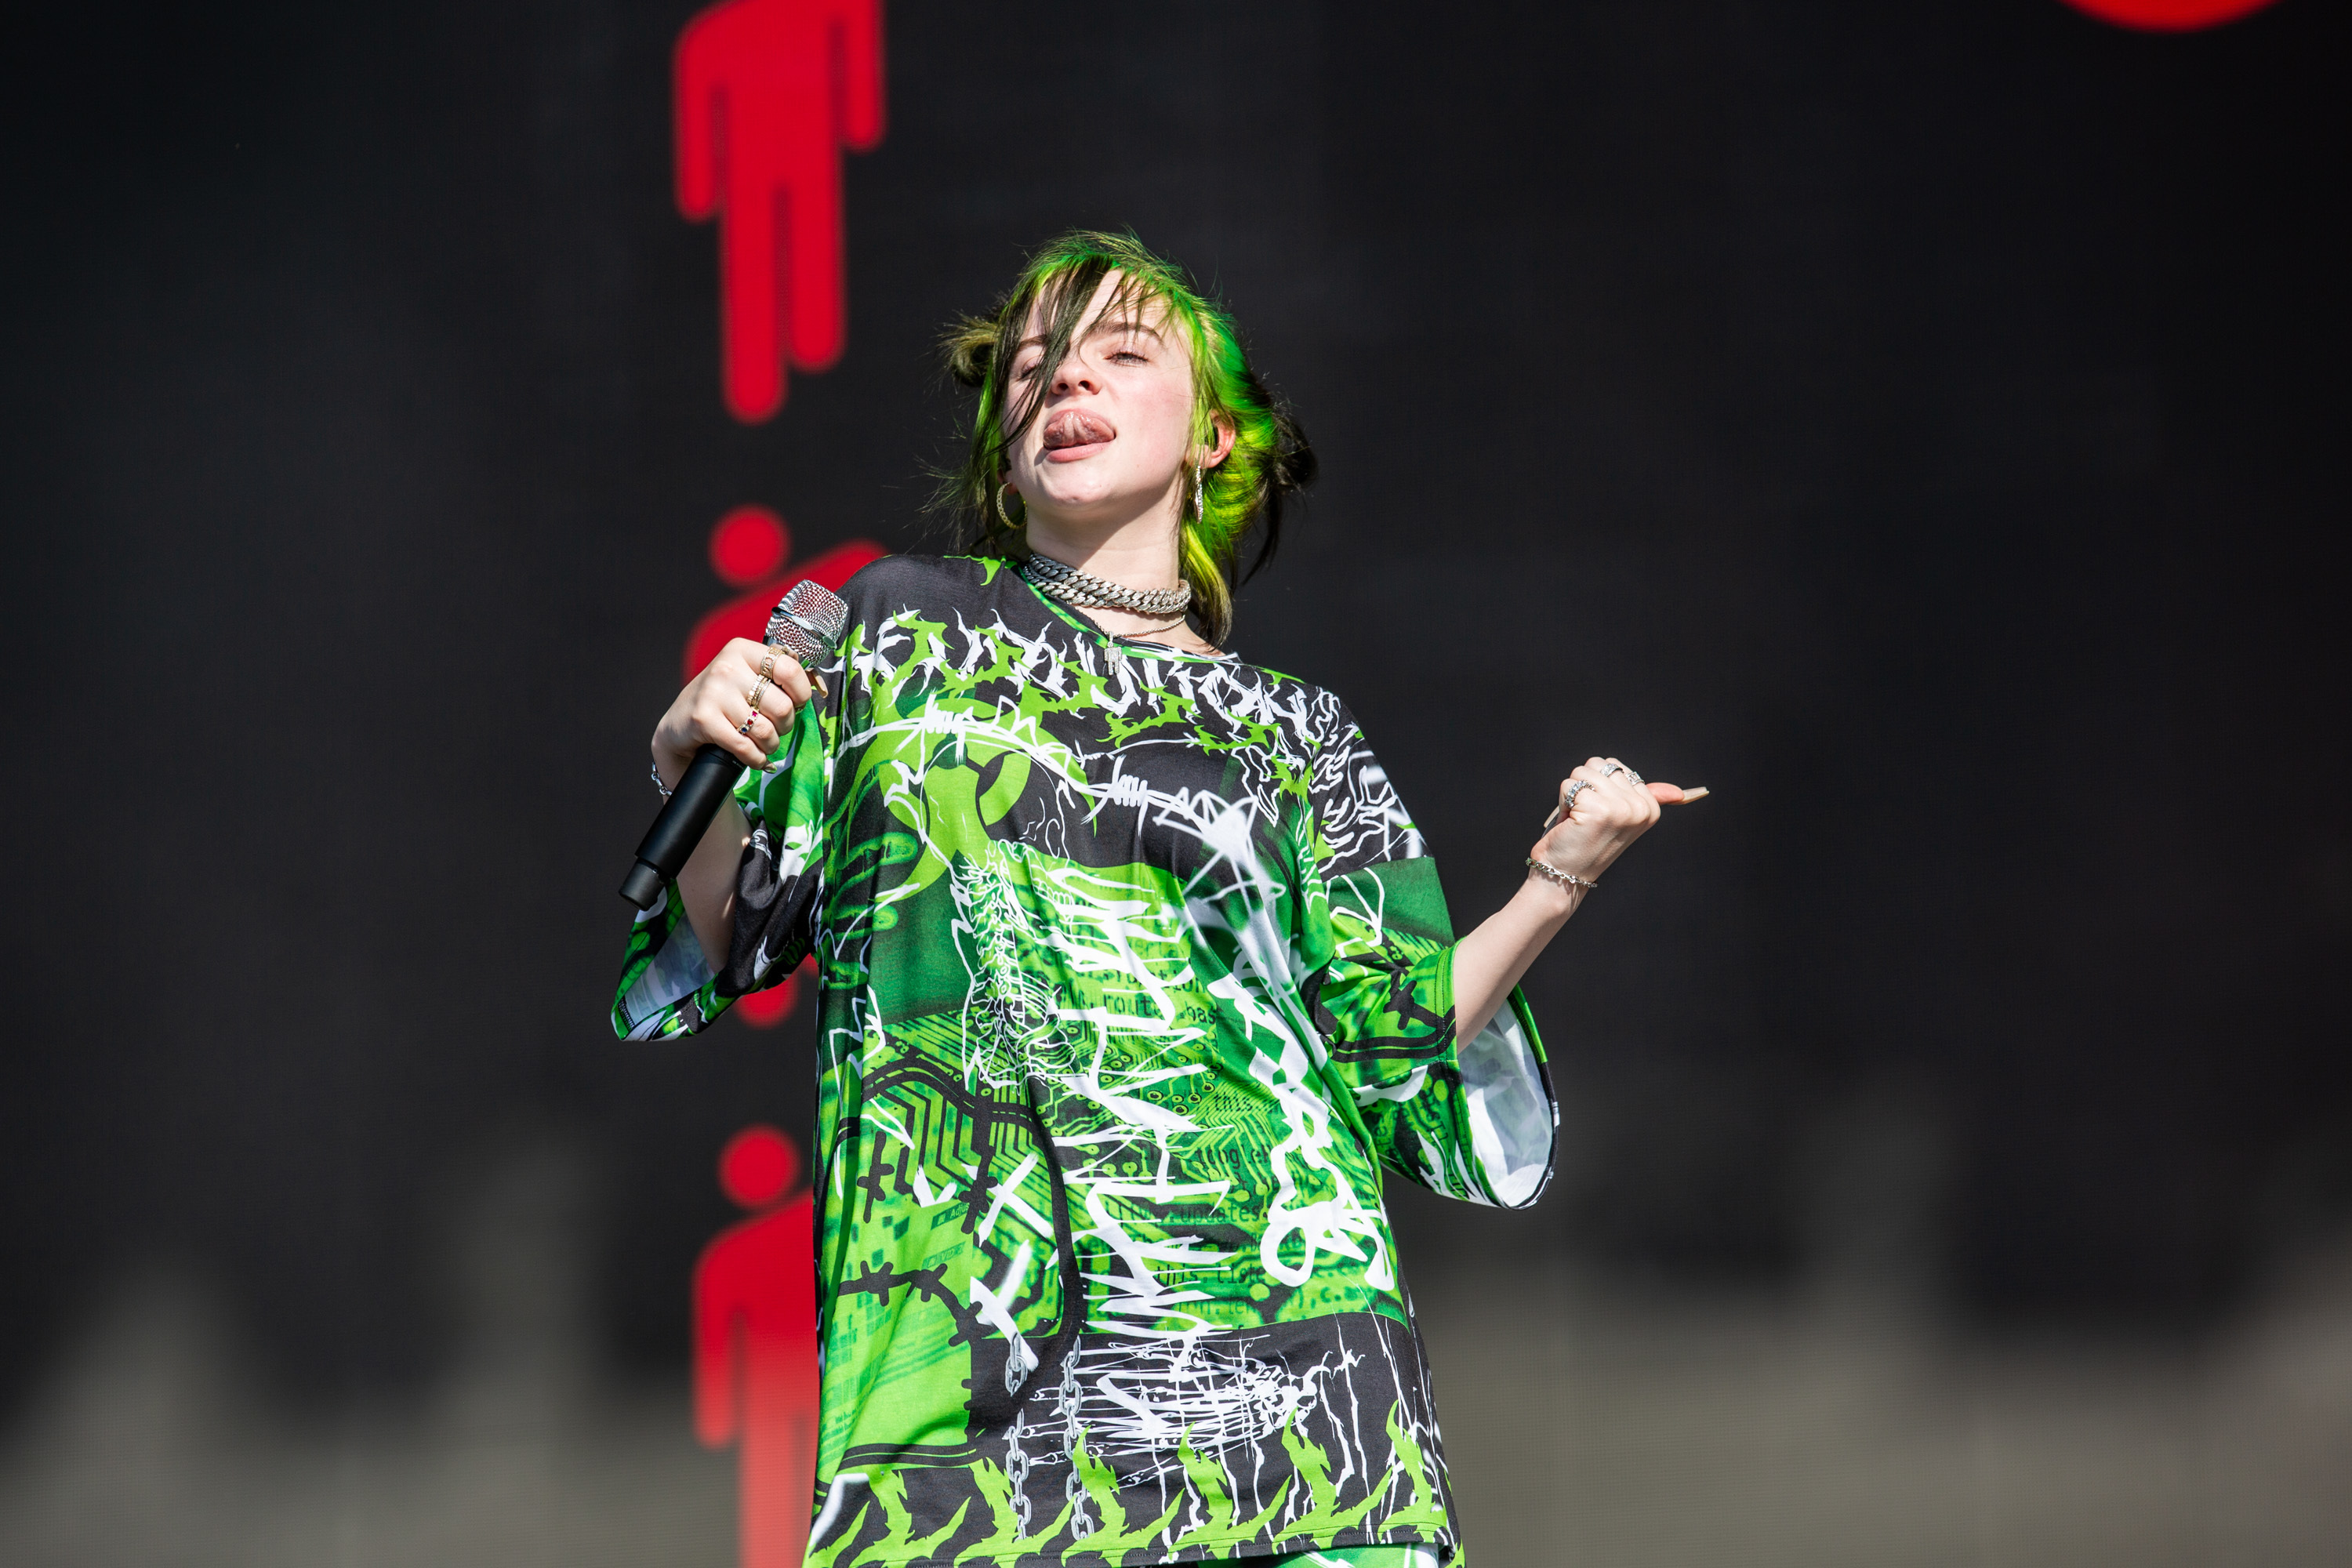 Billie Eilish's blue hair and outfit at the 2019 Reading and Leeds Festival - wide 6